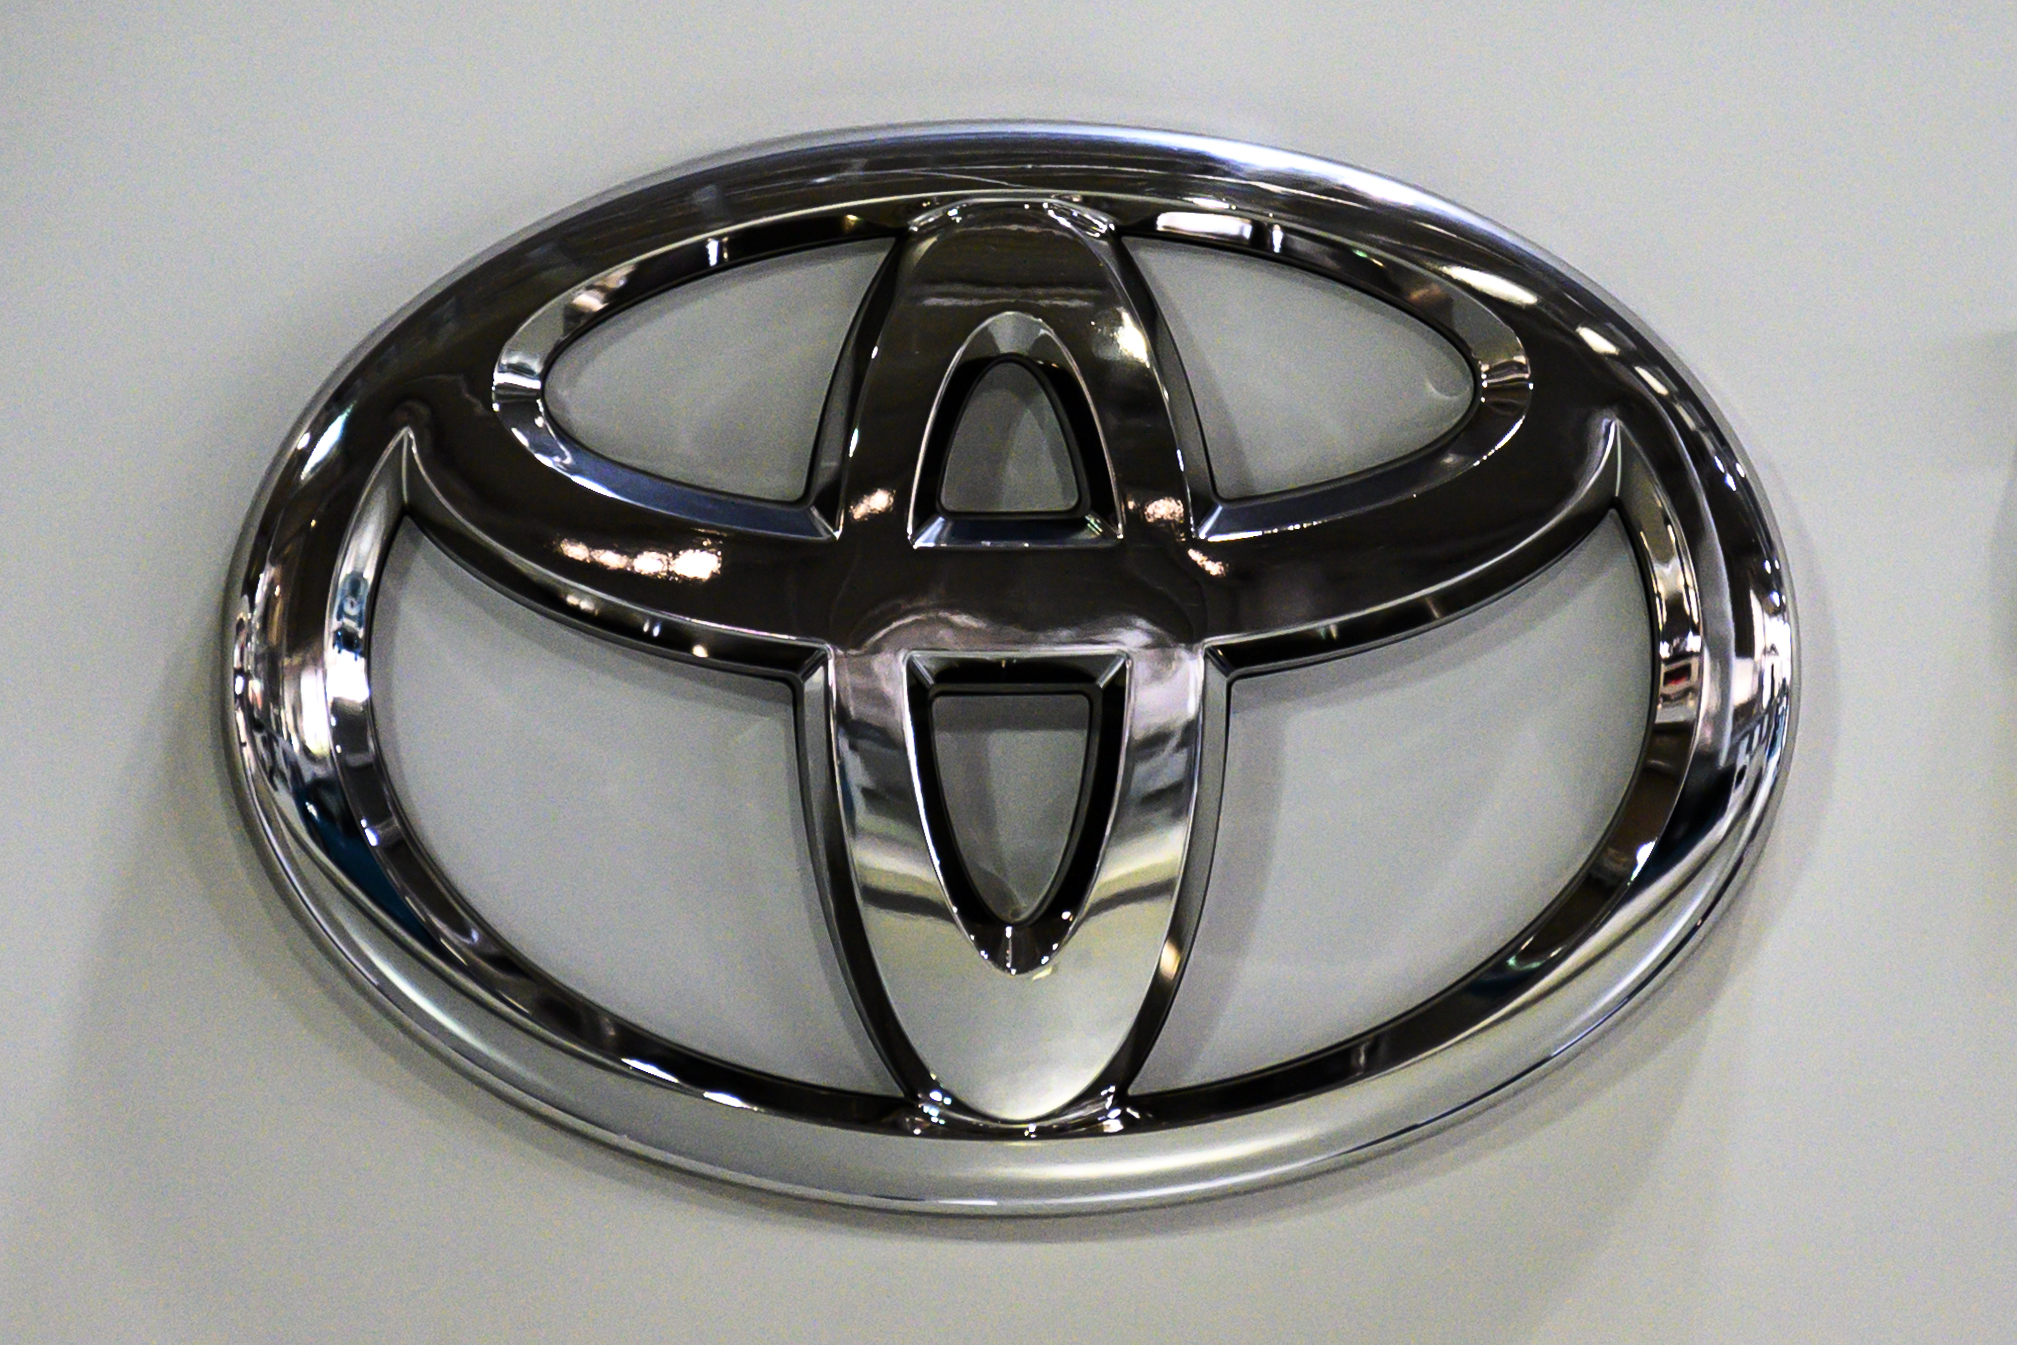 Toyota's logo, who recently attempted to introduce in-car subscription services